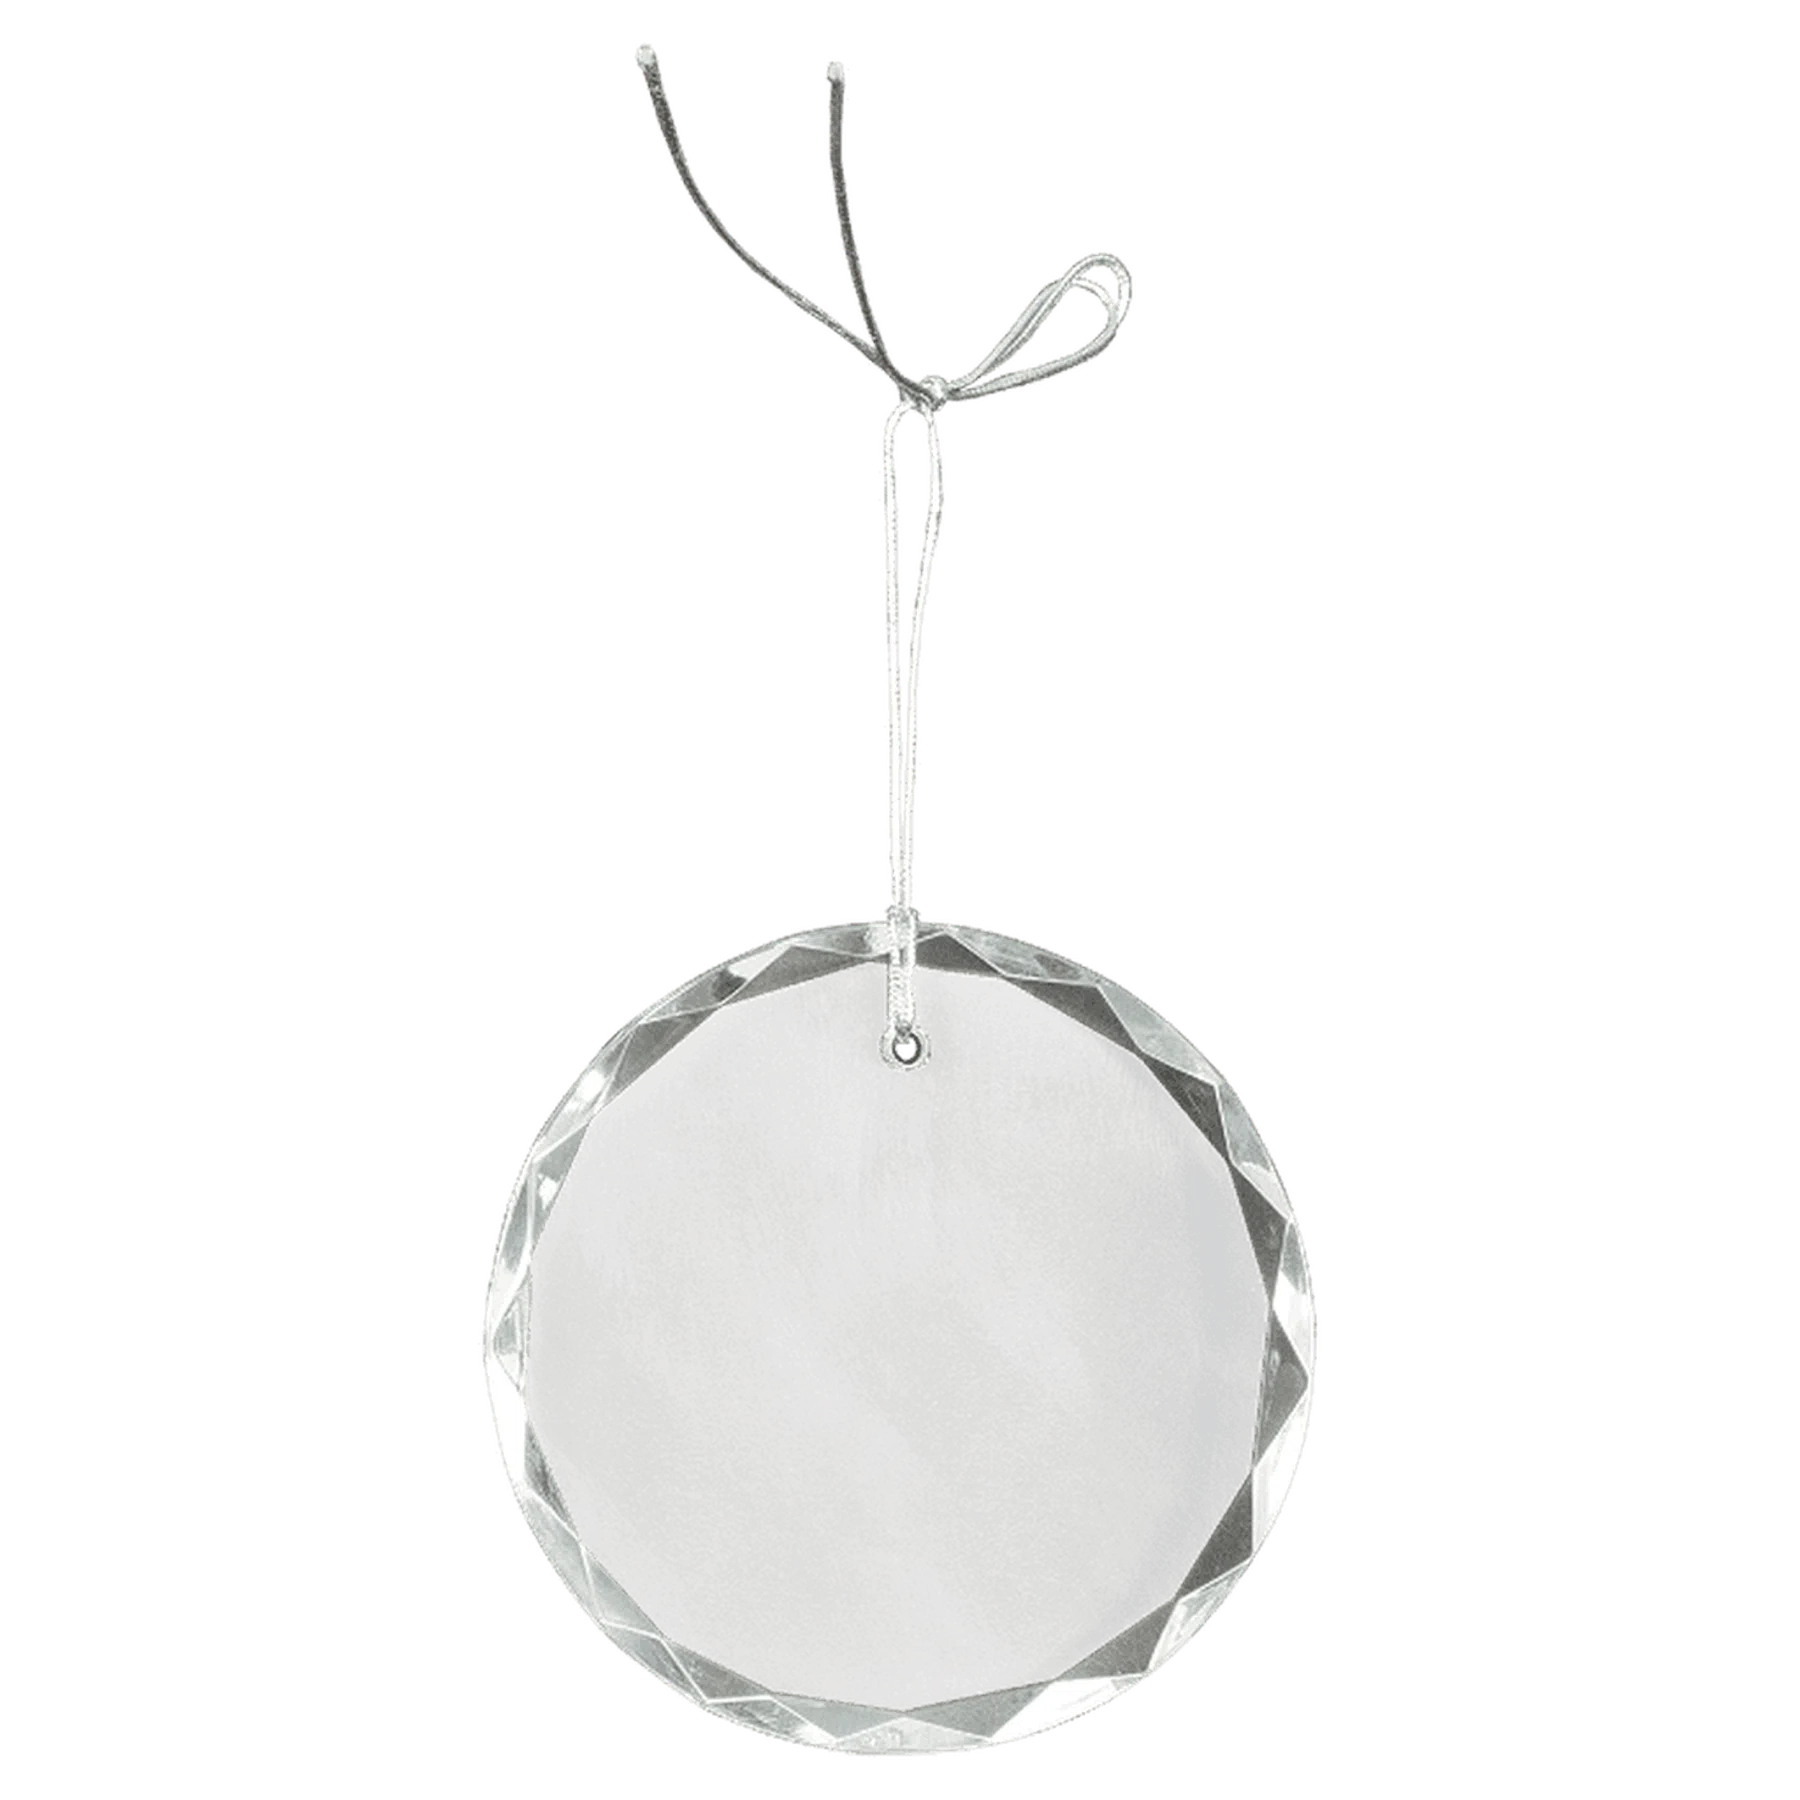 3" Faceted Crystal Round Ornament with Silver String